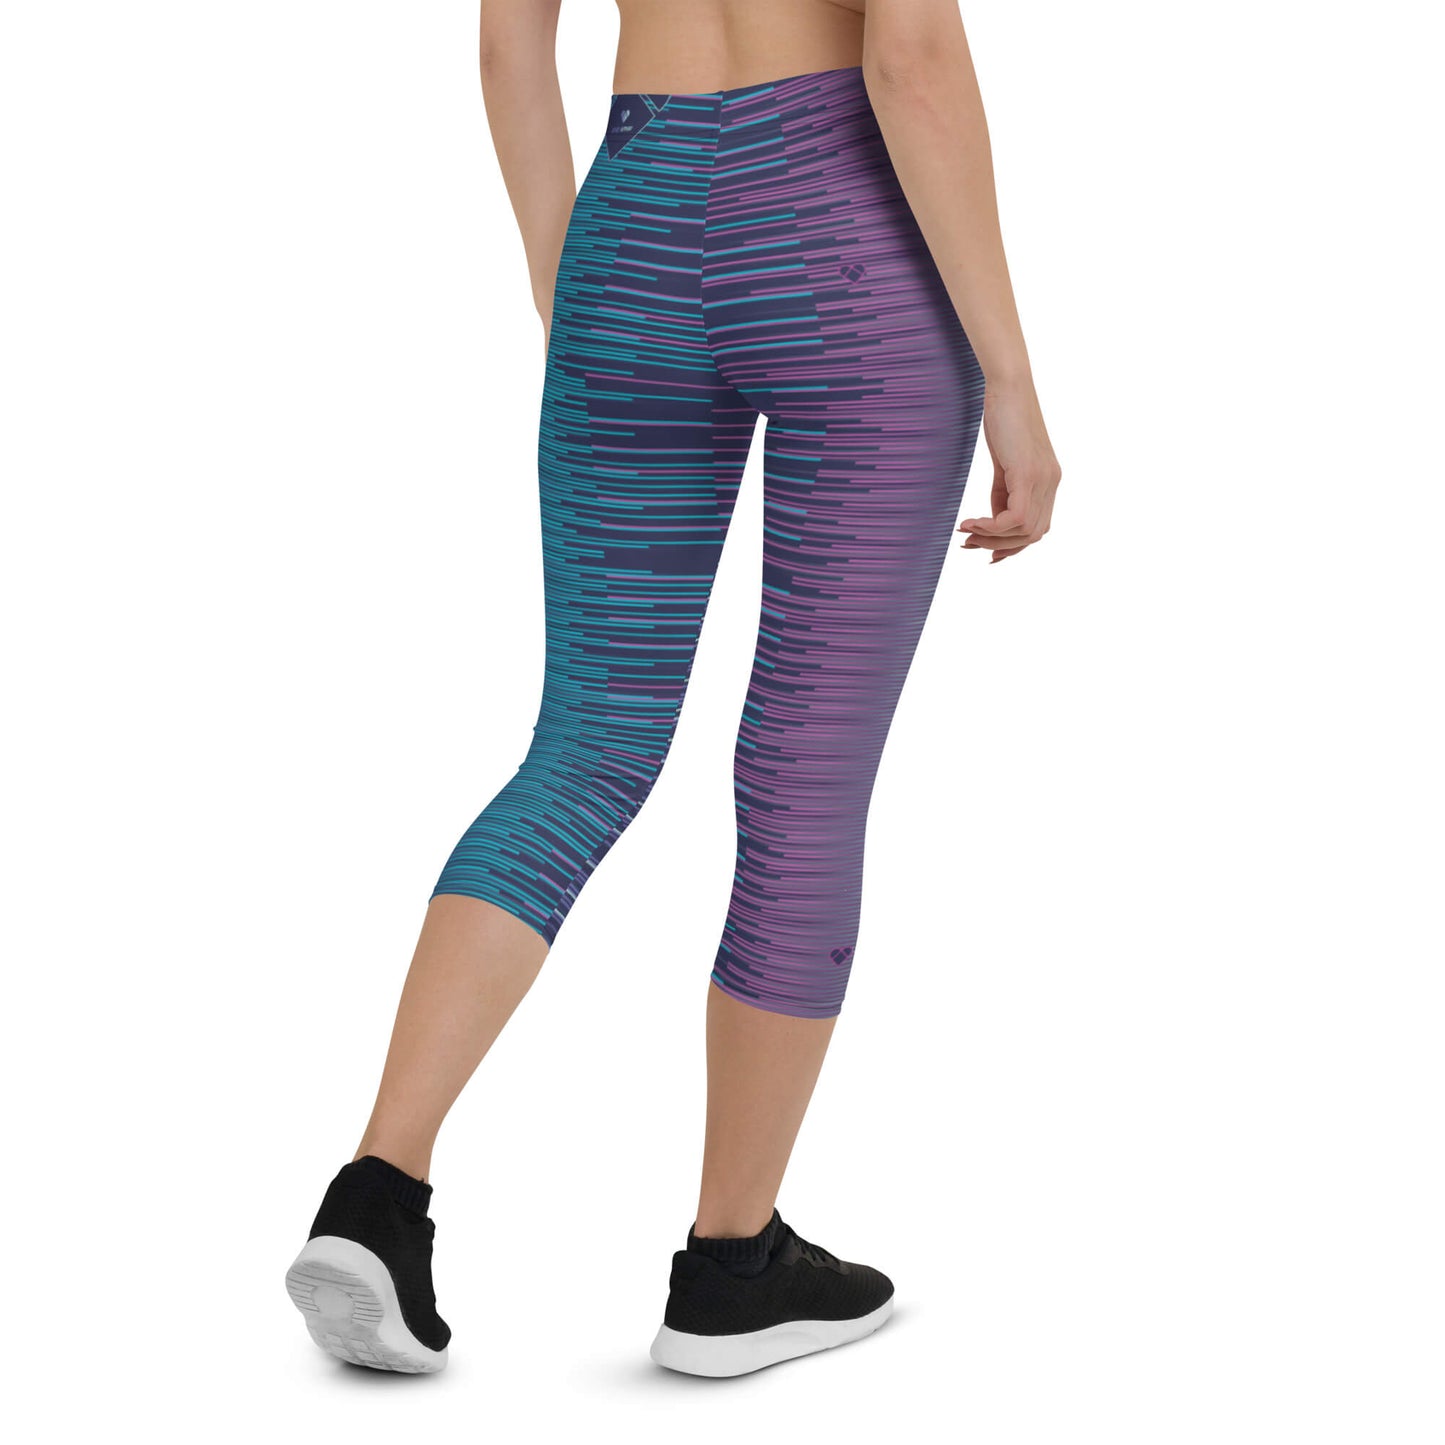 Chic and Playful Capri Leggings with Gradient Stripes